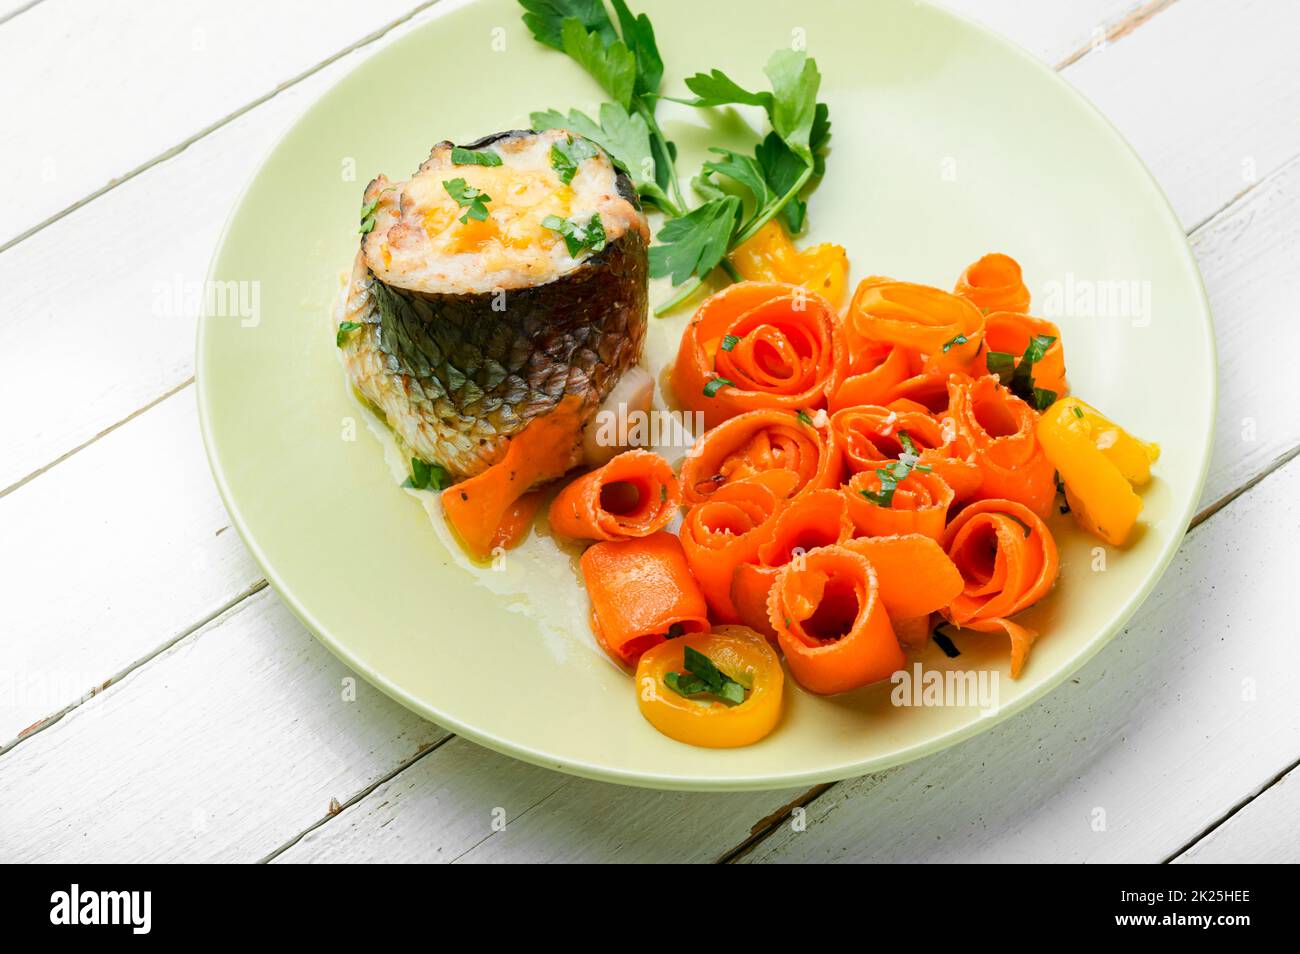 Minced fish appetizer Stock Photo